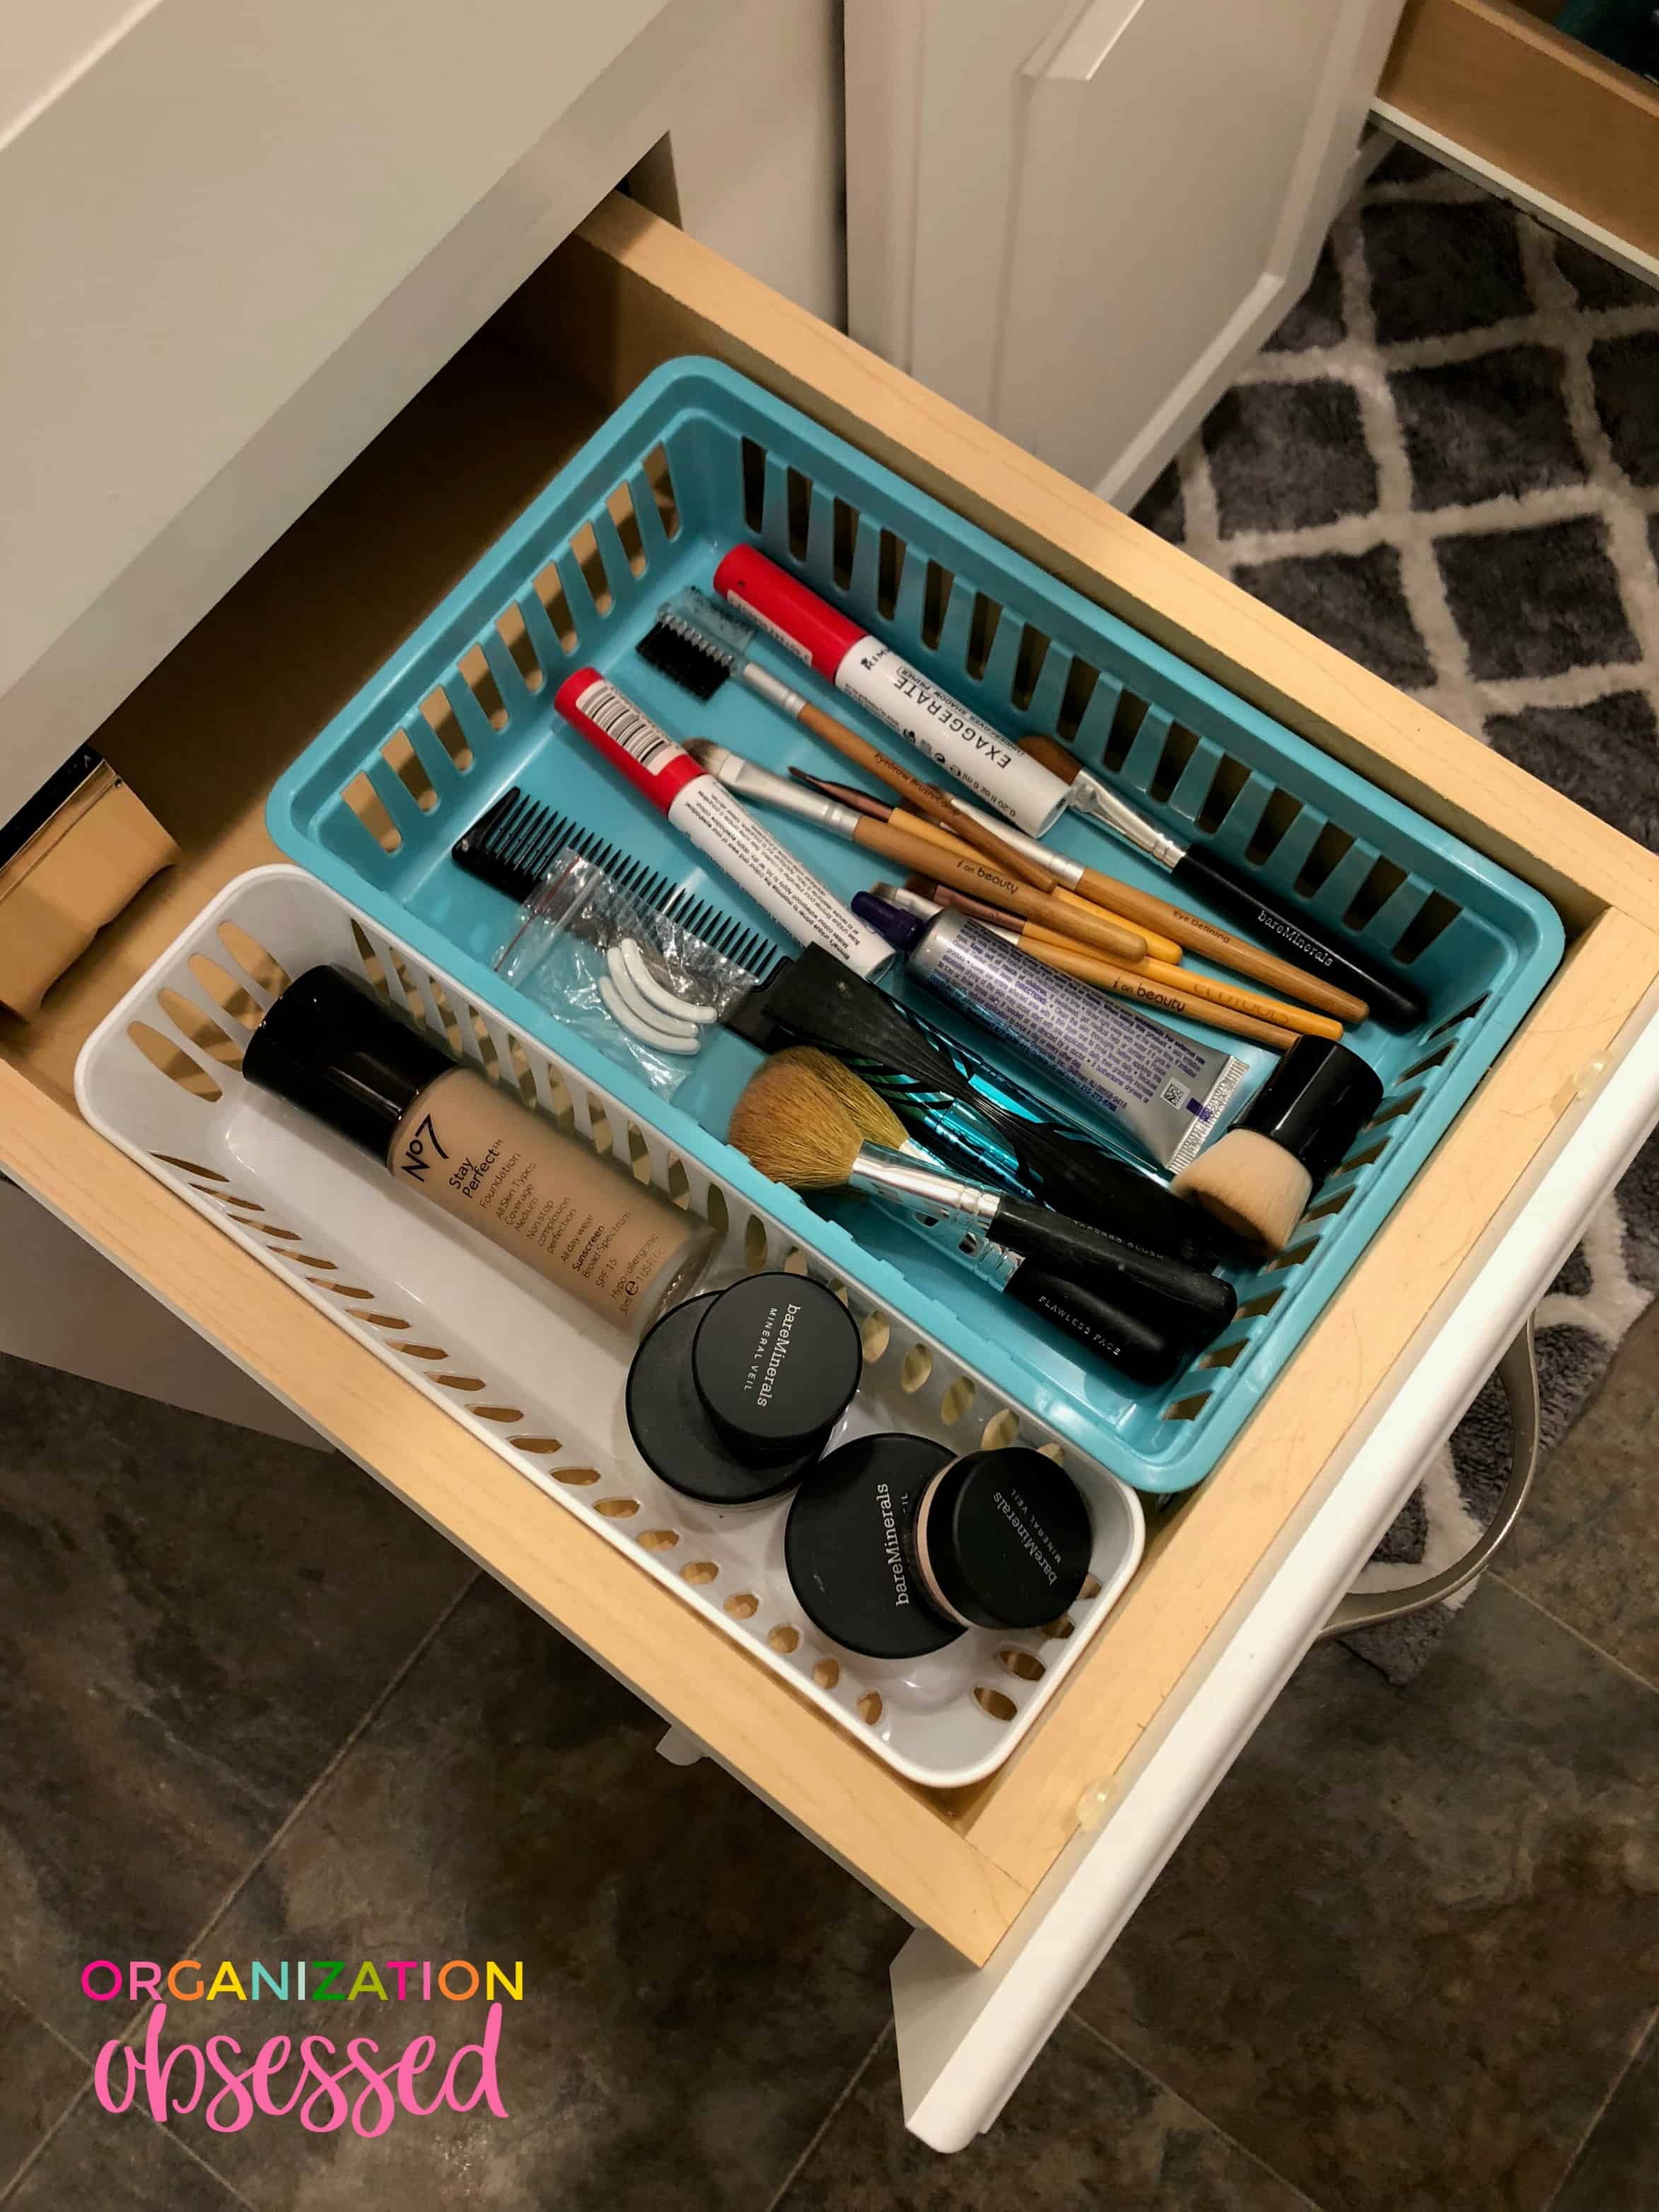 How To Organize Bathroom Drawers 3 Organization Obsessed